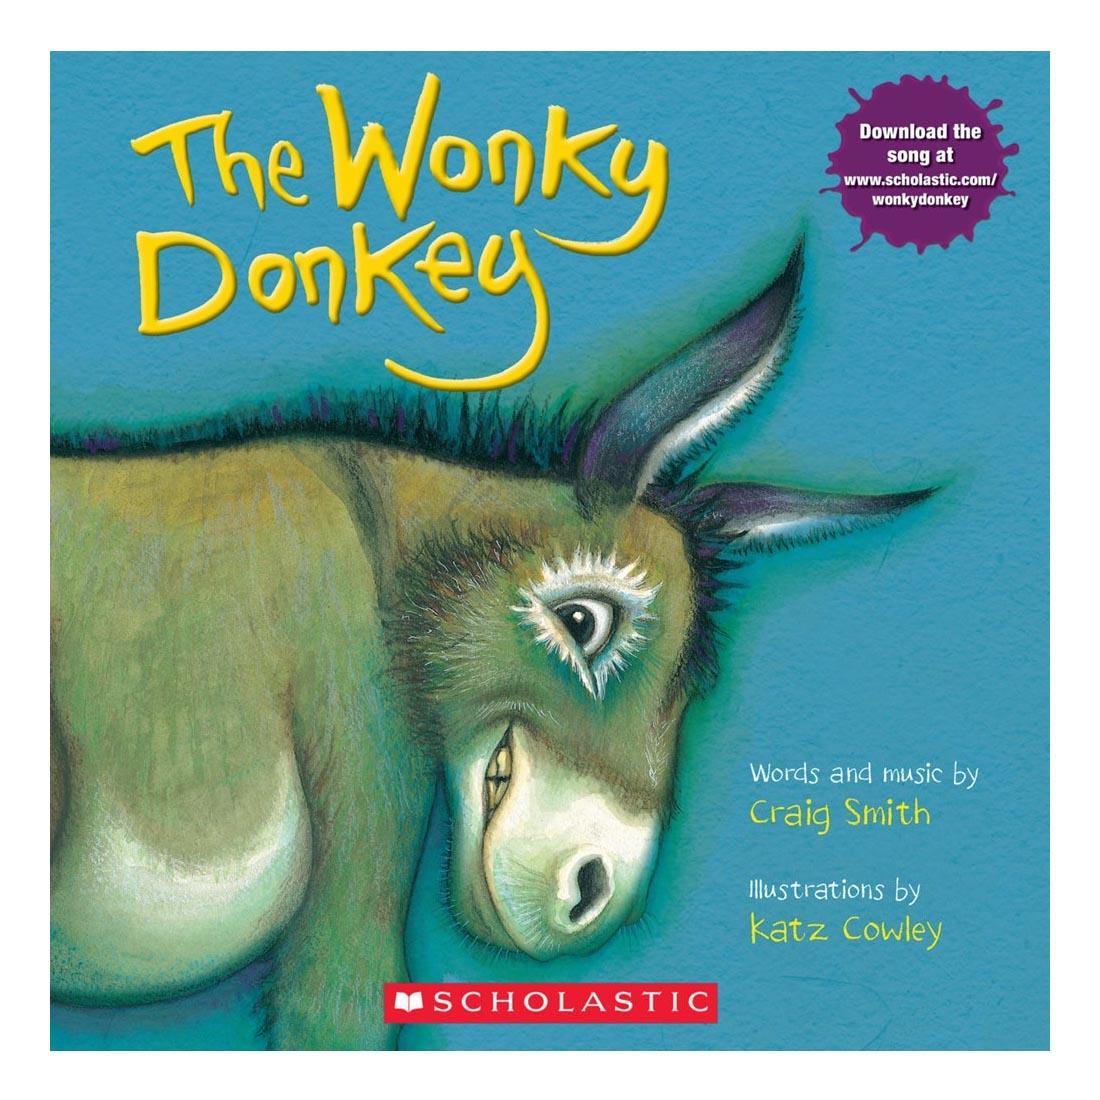 The Wonky Donkey book by Scholastic